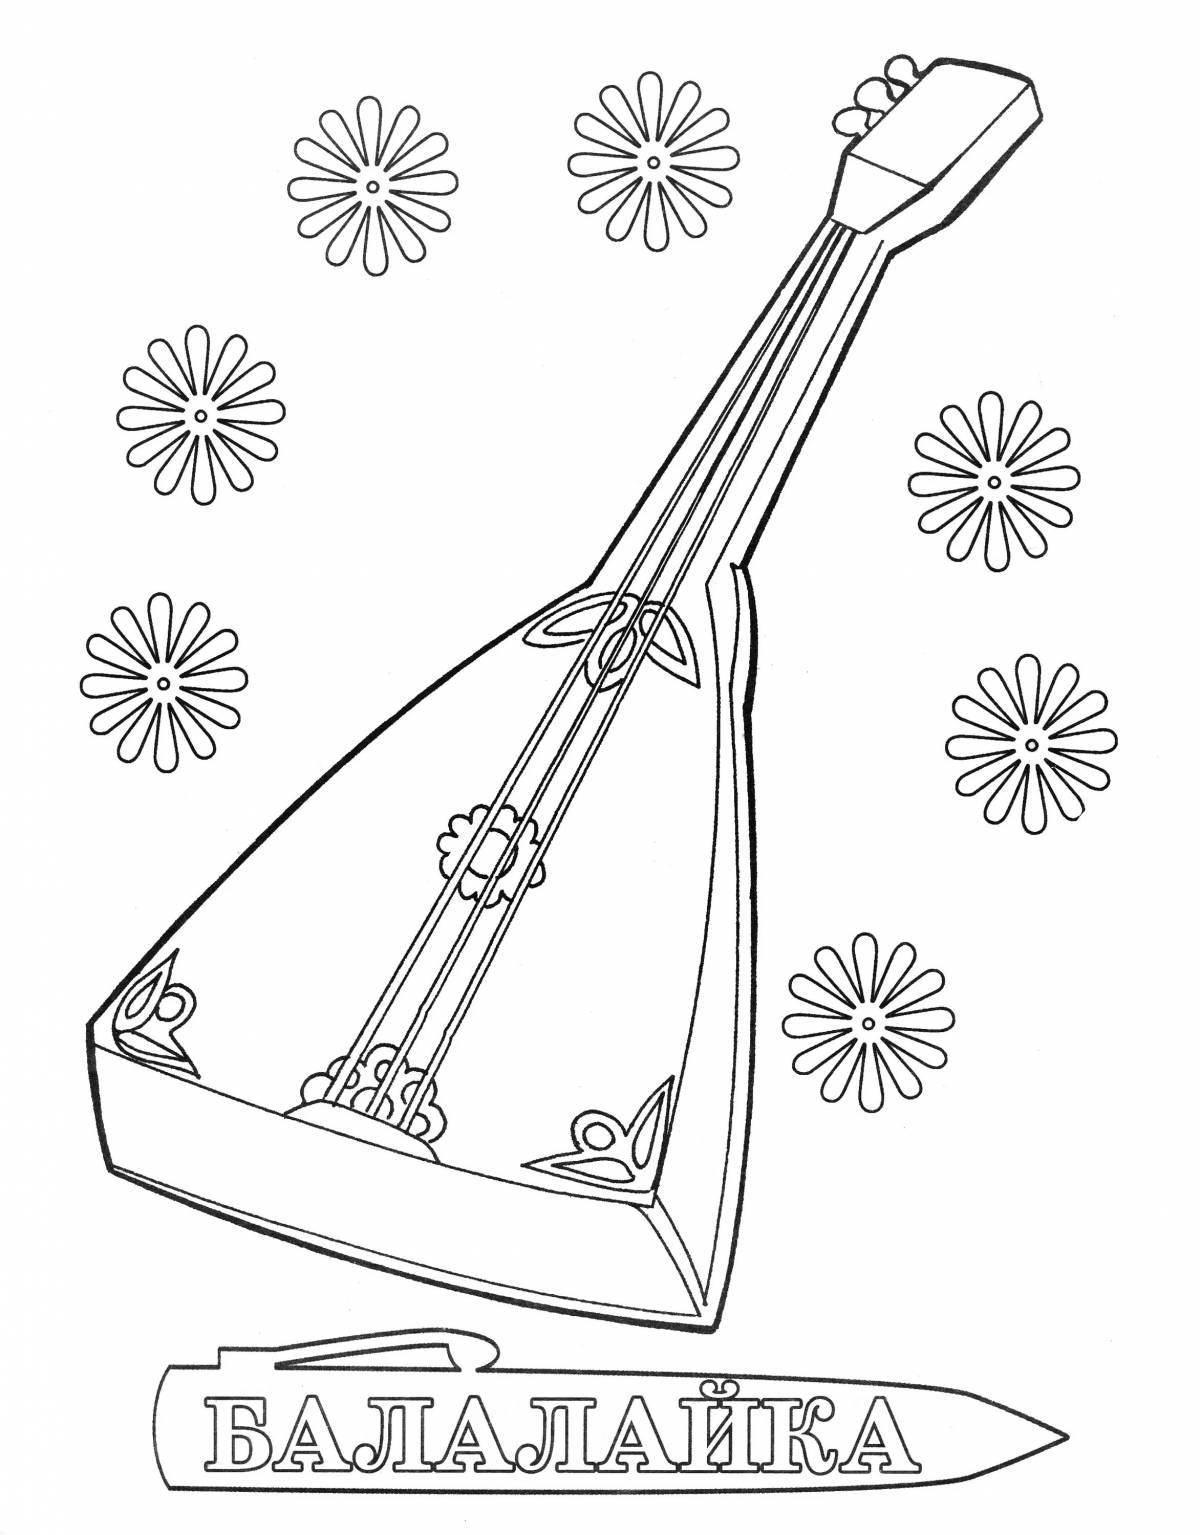 Coloring for bright folk musical instruments